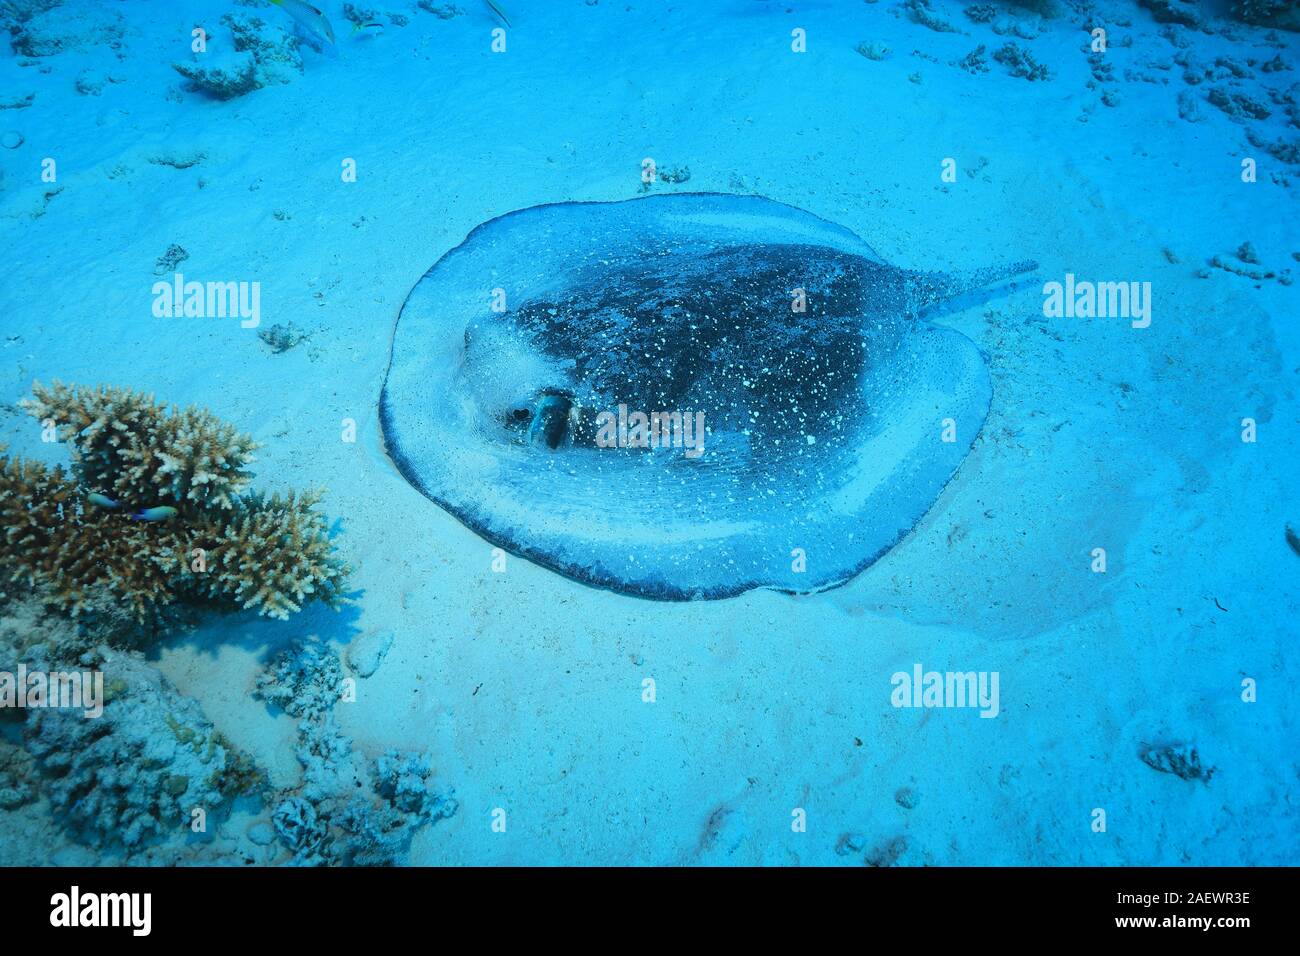 Porcupine ray (Urogymnus asperrimus) underwater in the tropical coral reef of the red sea Stock Photo